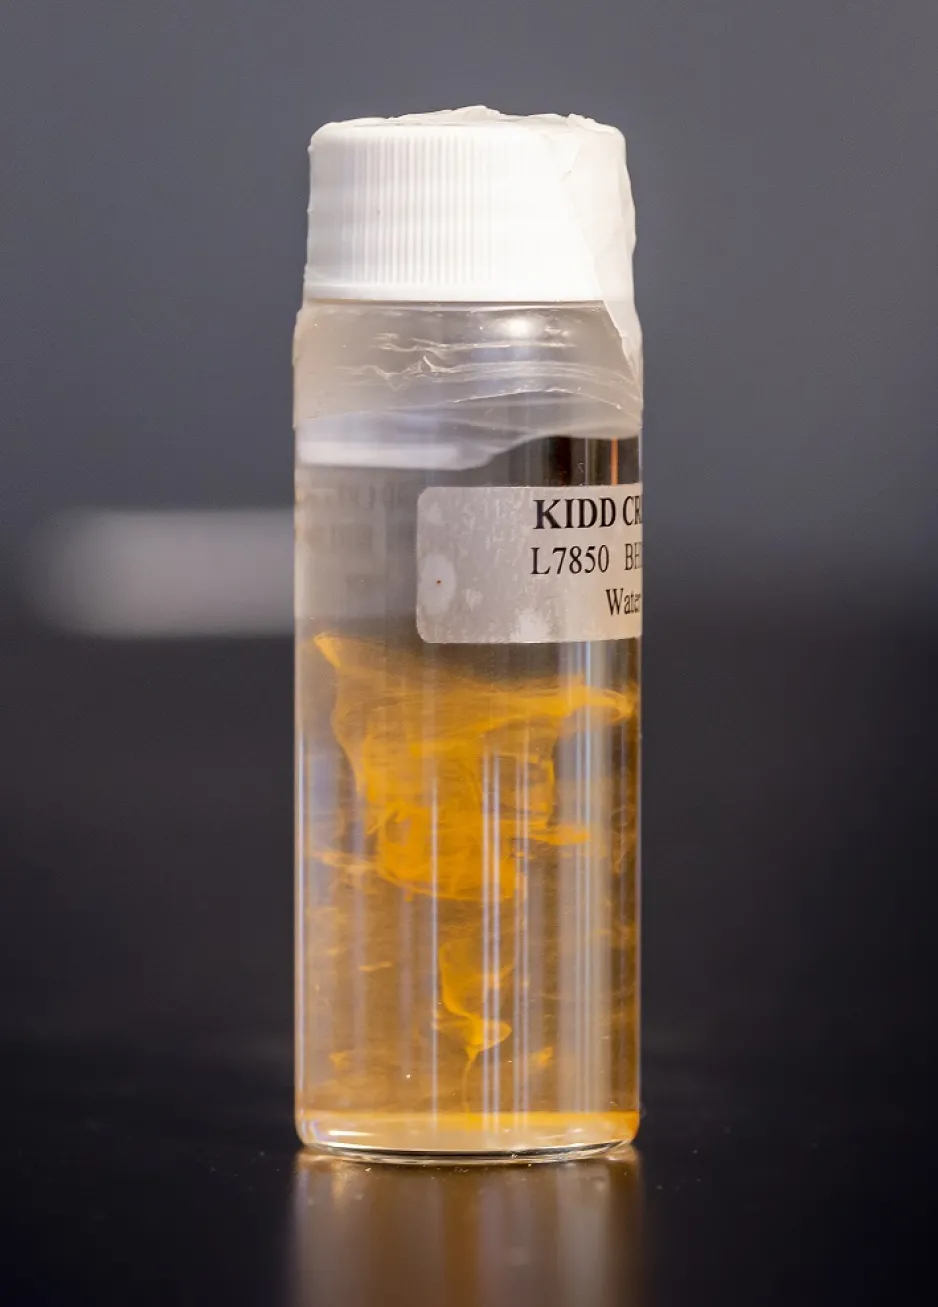 Golden particulate swirls inside a glass bottle with a white stopper.